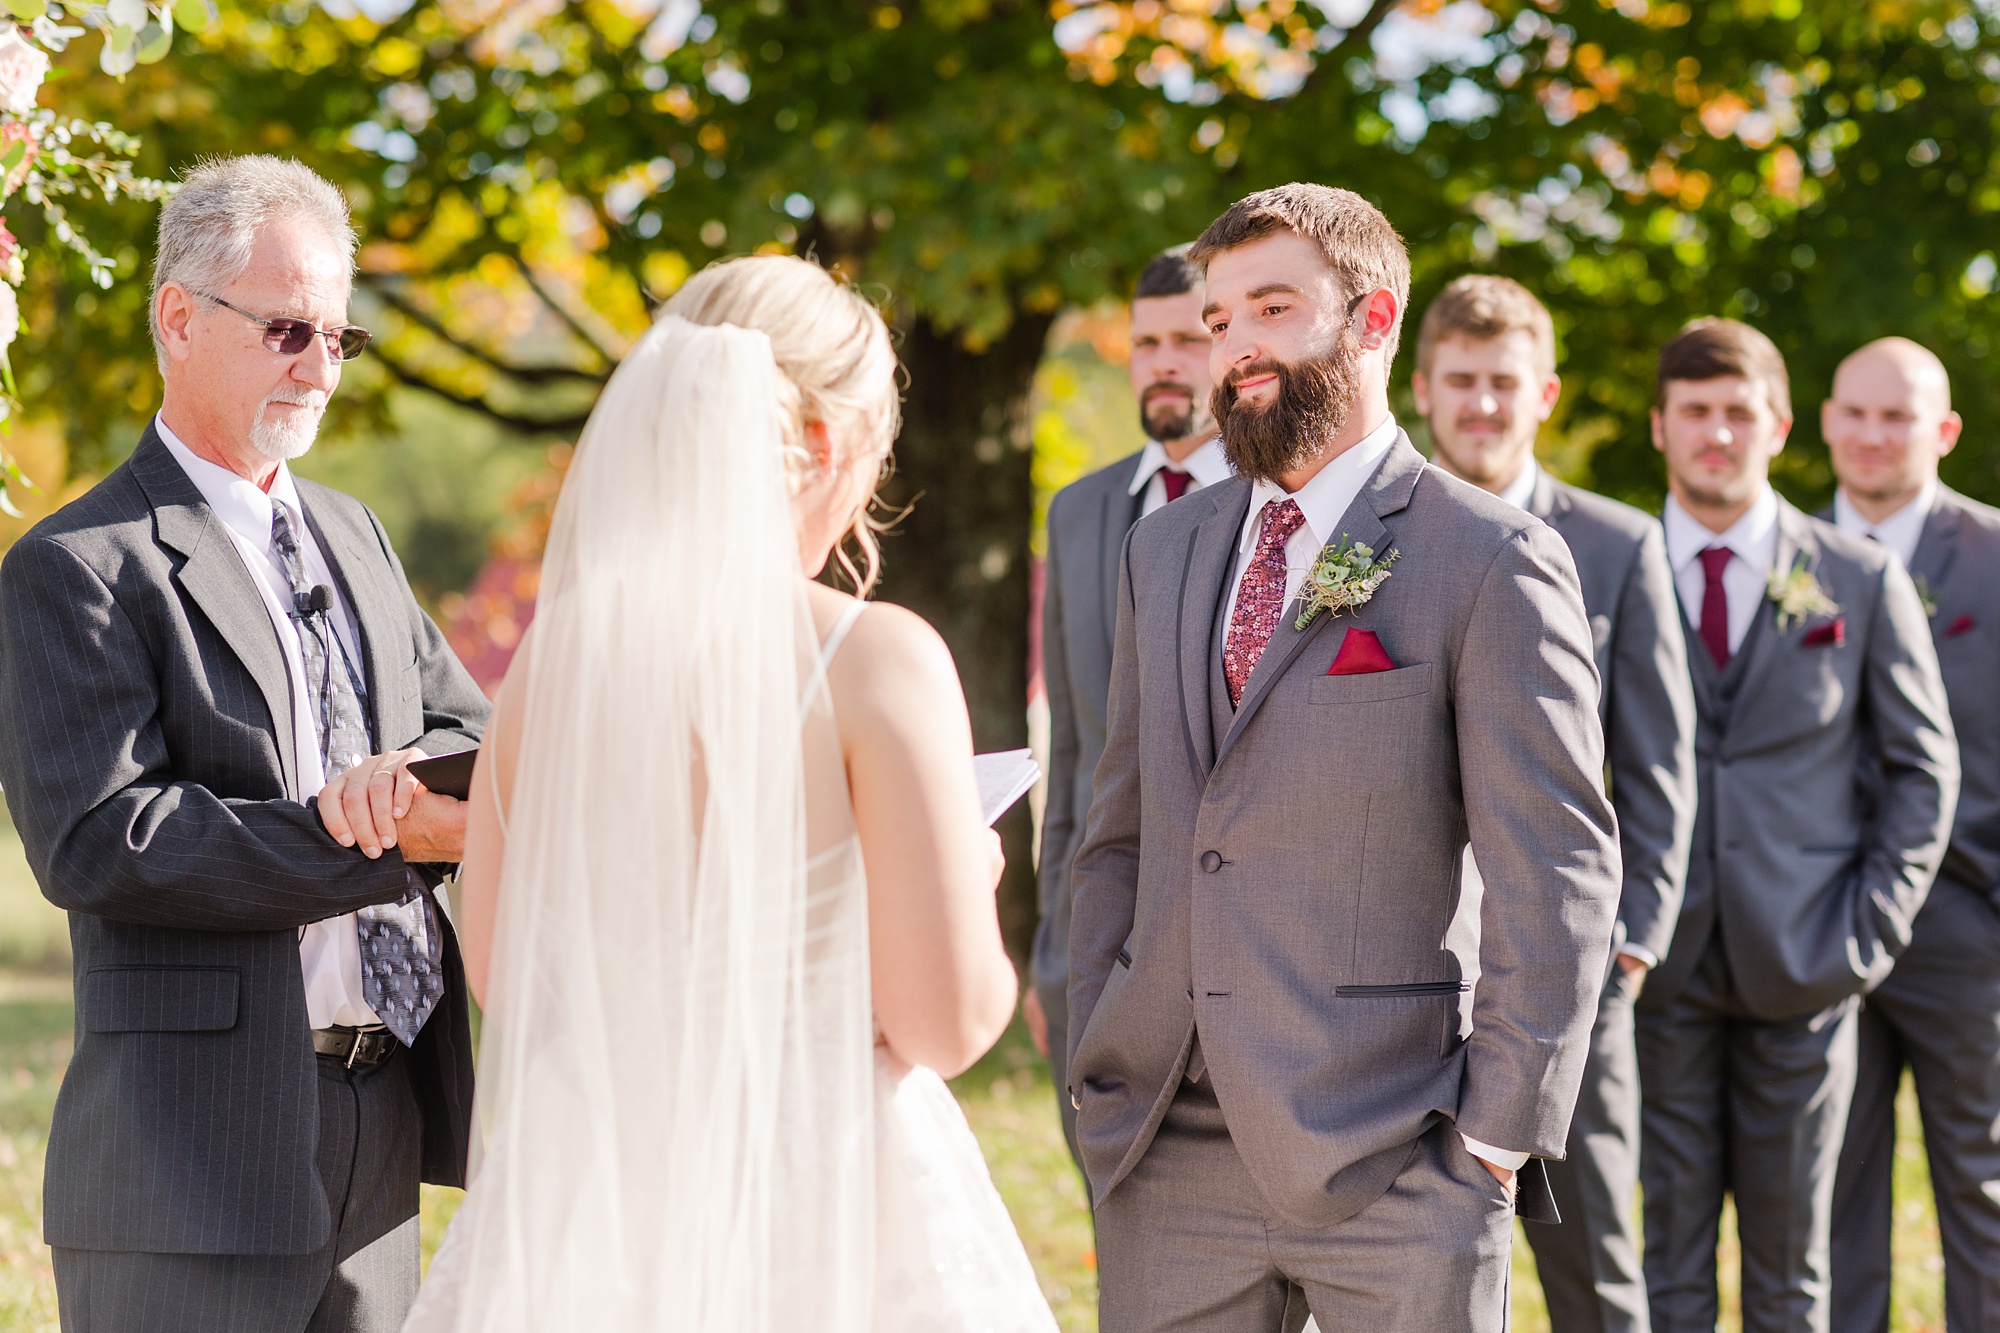 bride and groom exchange vows in outdoor fall wedding ceremony